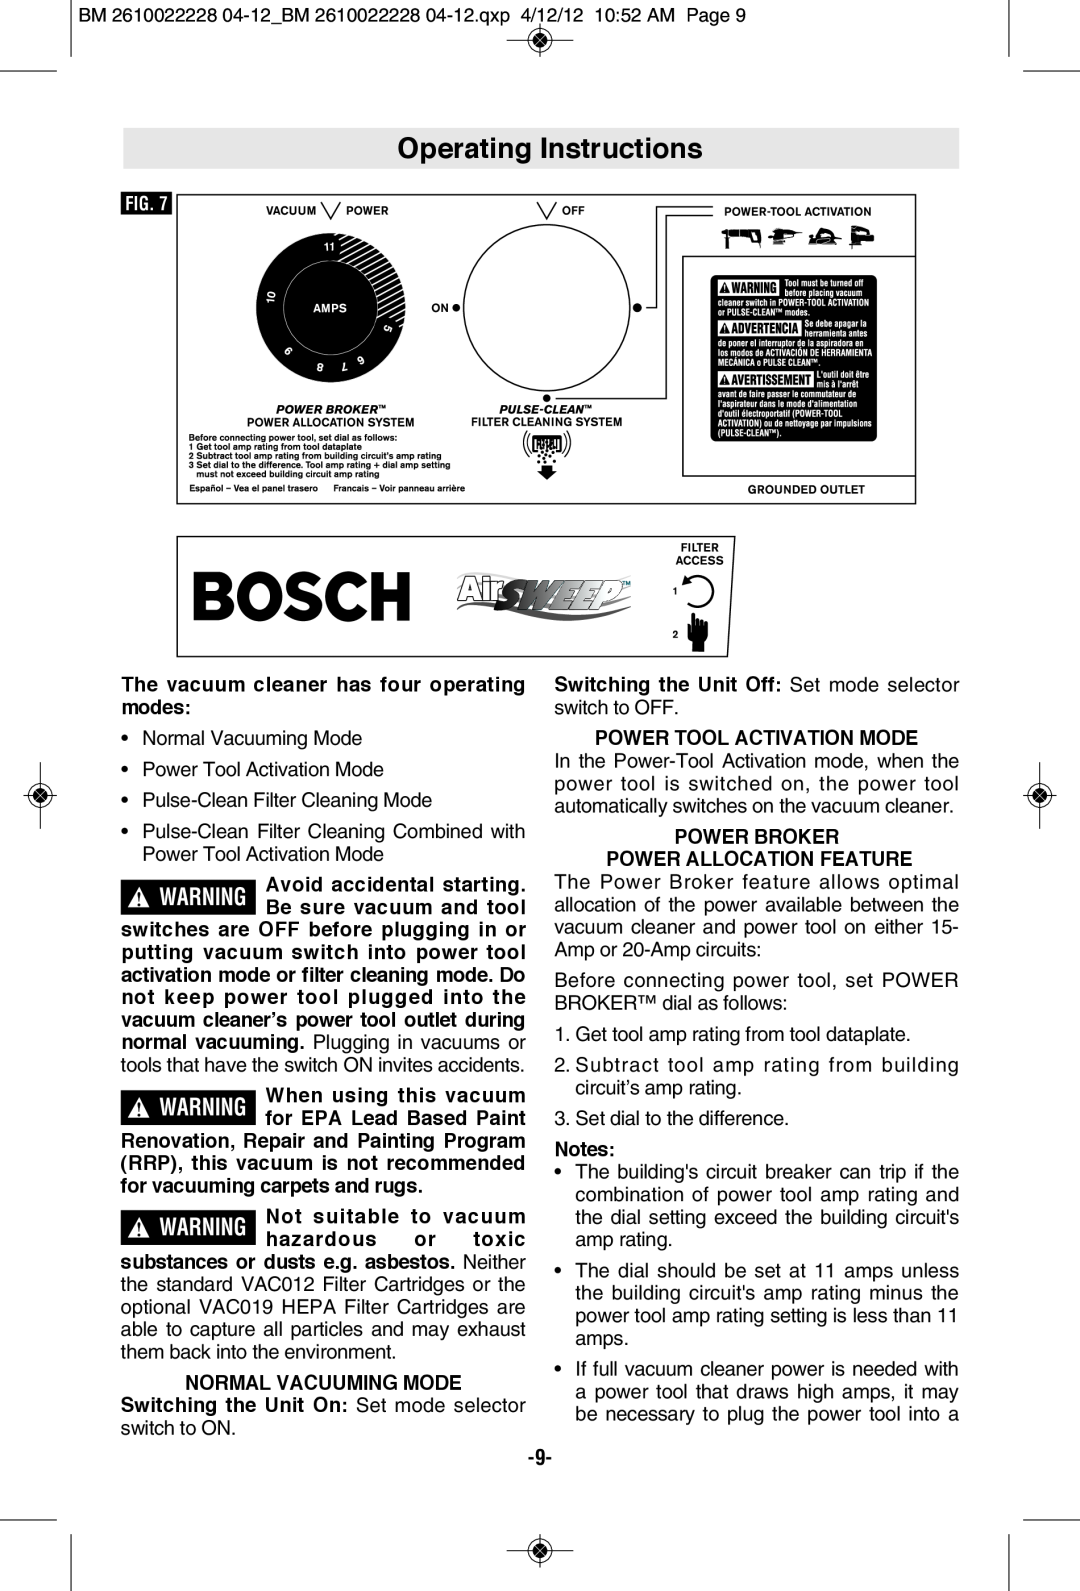 Bosch Power Tools 3931A-PB Operating Instructions, The vacuum cleaner has four operating modes, Normal Vacuuming Mode 